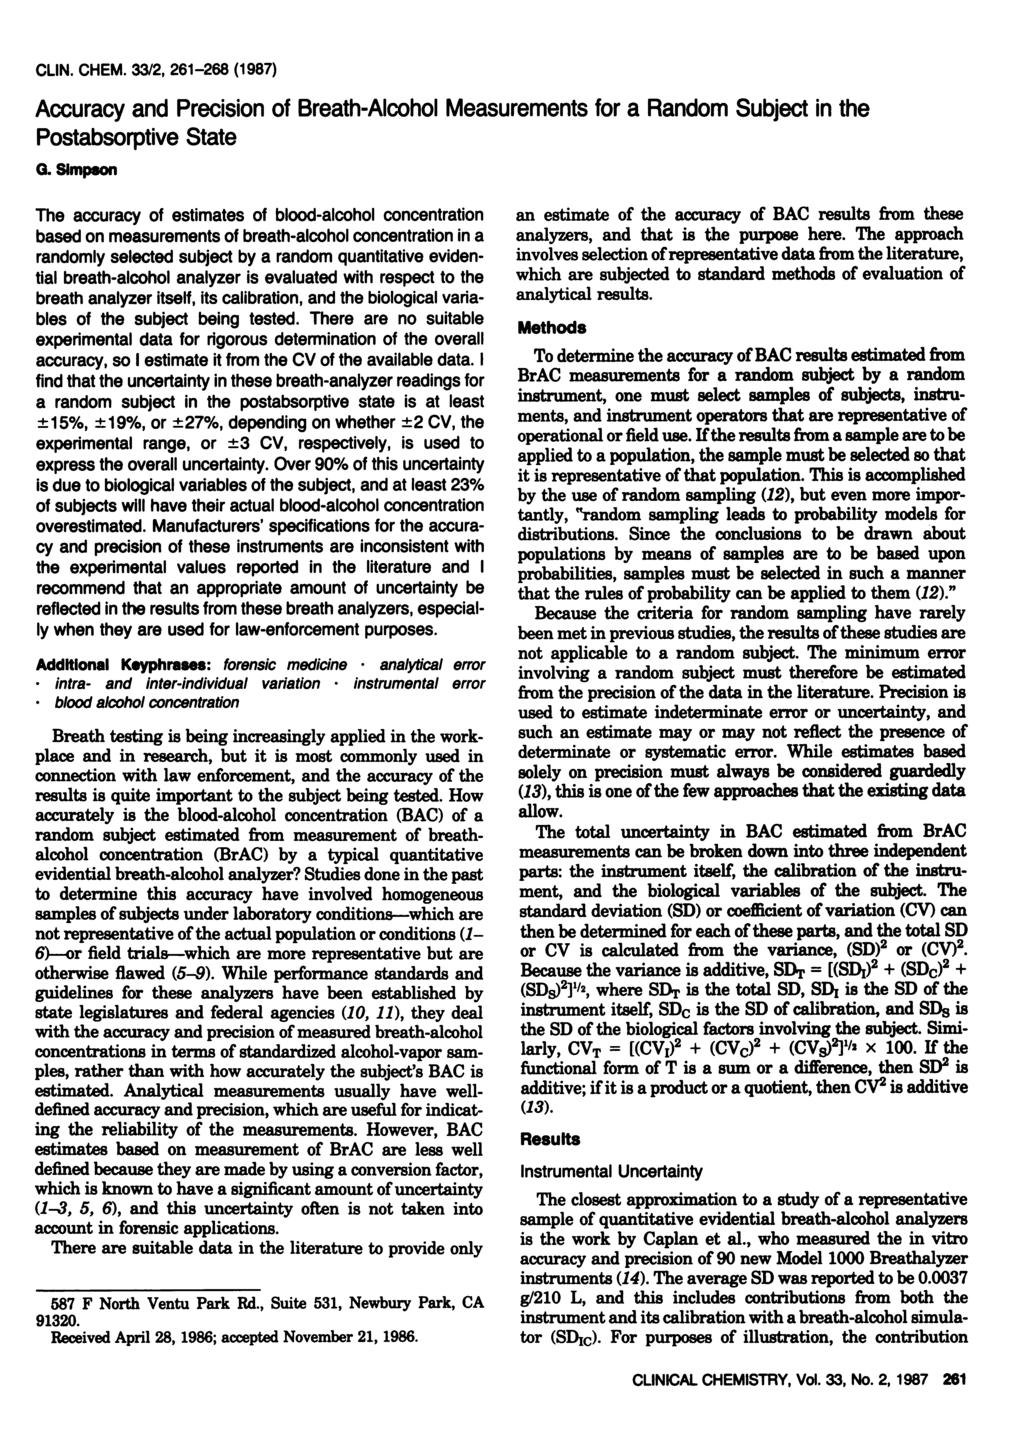 CLIN. CHEM. 33/2, 261-268 (1987) Accuracy and Precisionof Breath-AlcoholMeasurementsfor a Random Subject in the PostabsorptiveState G.